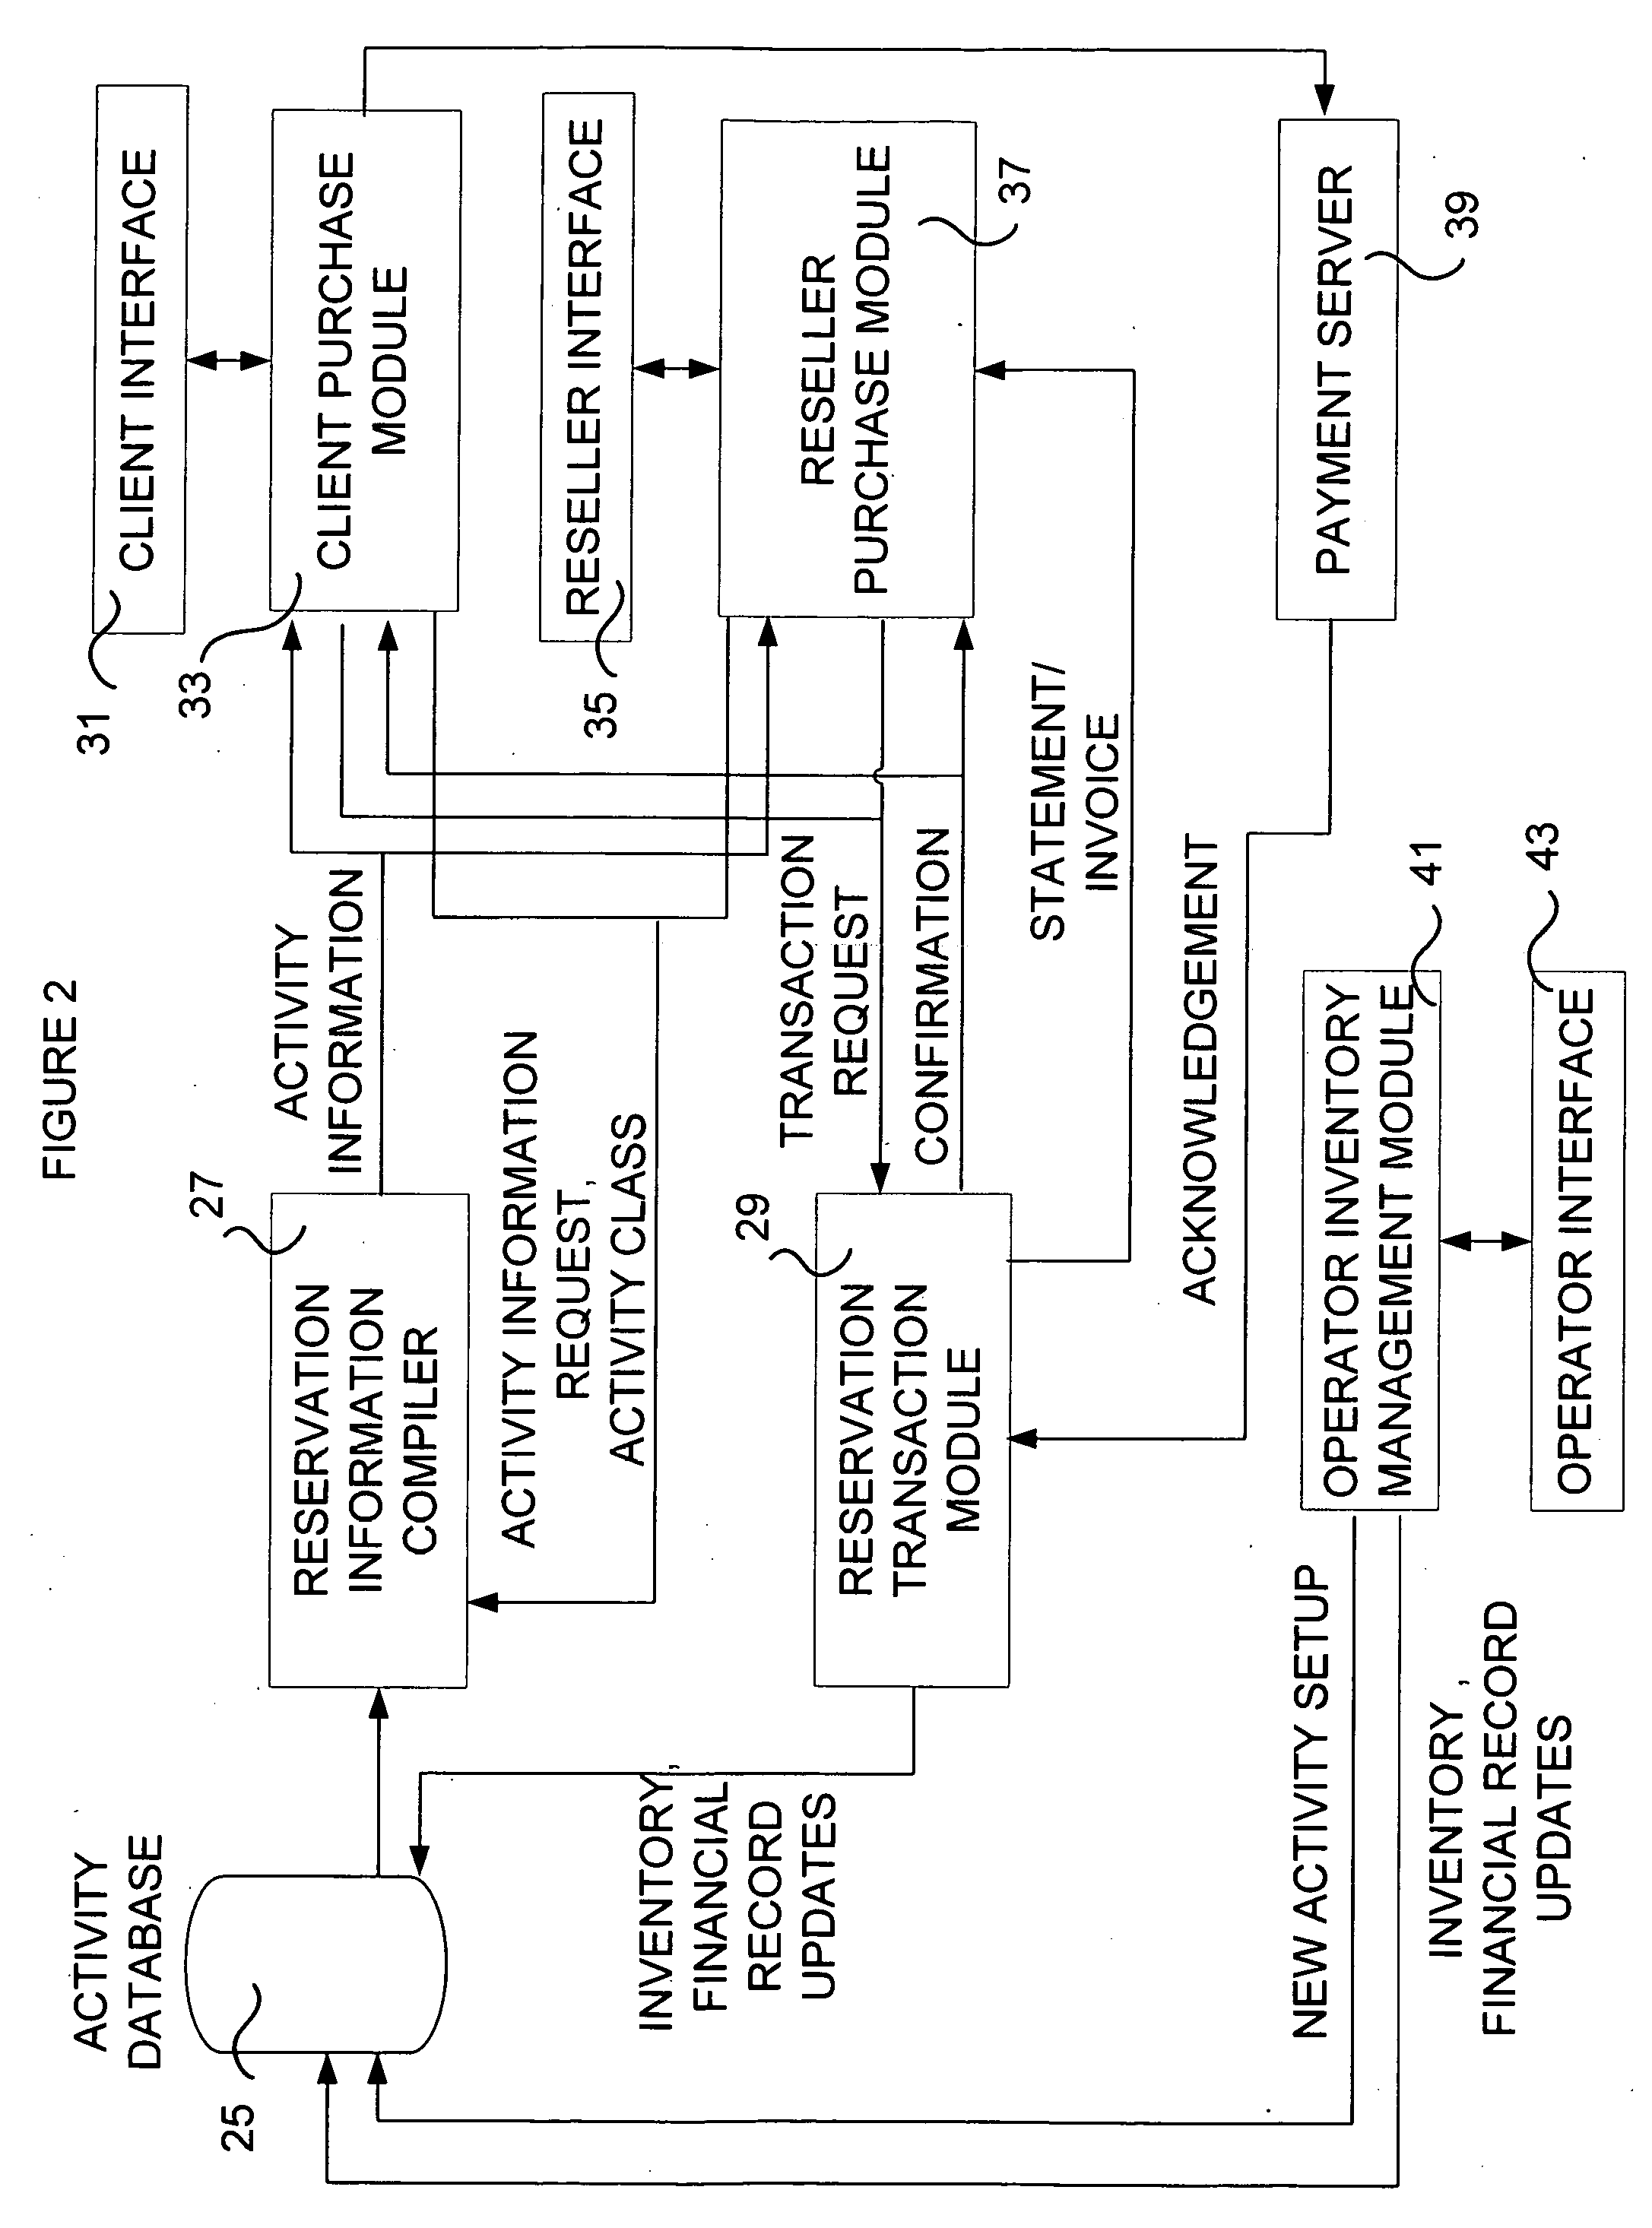 Method and system for reservation and management of recreational activities